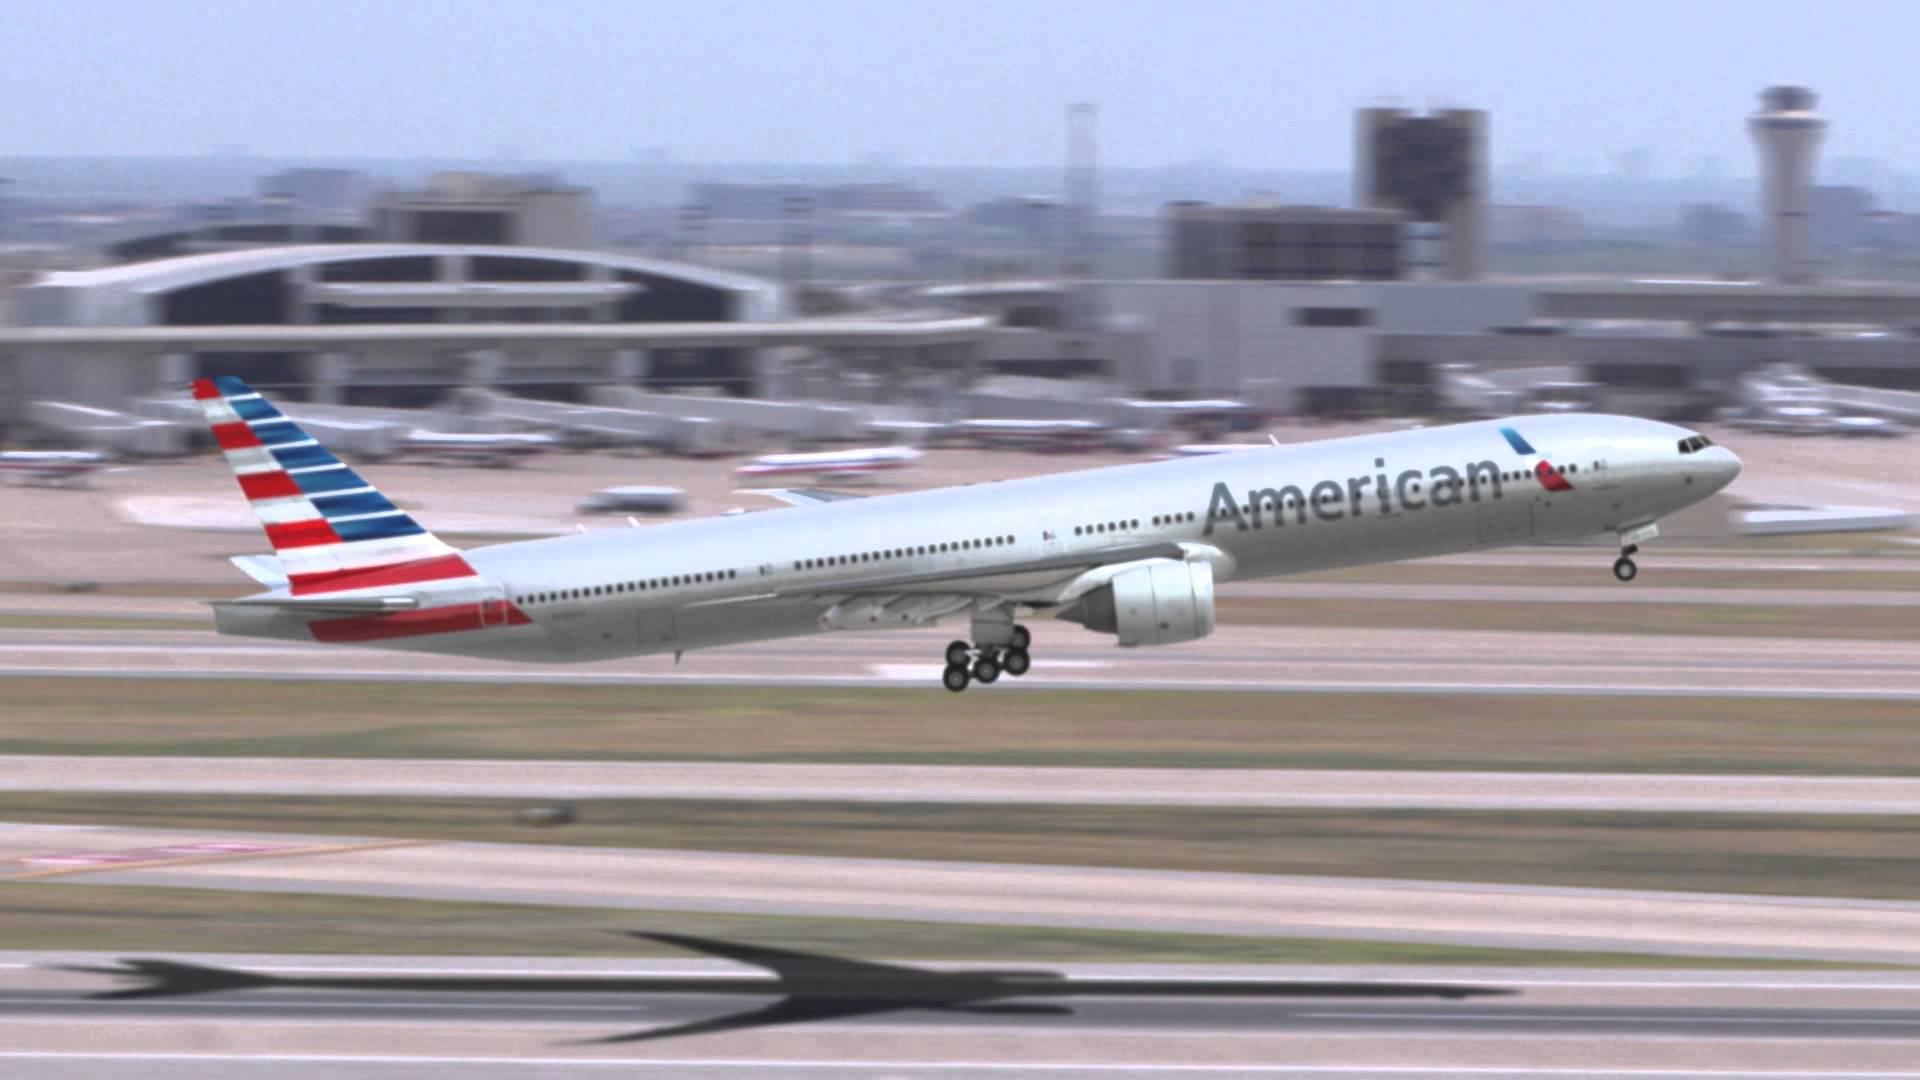 American Airlines New Livery On The 777 300ER